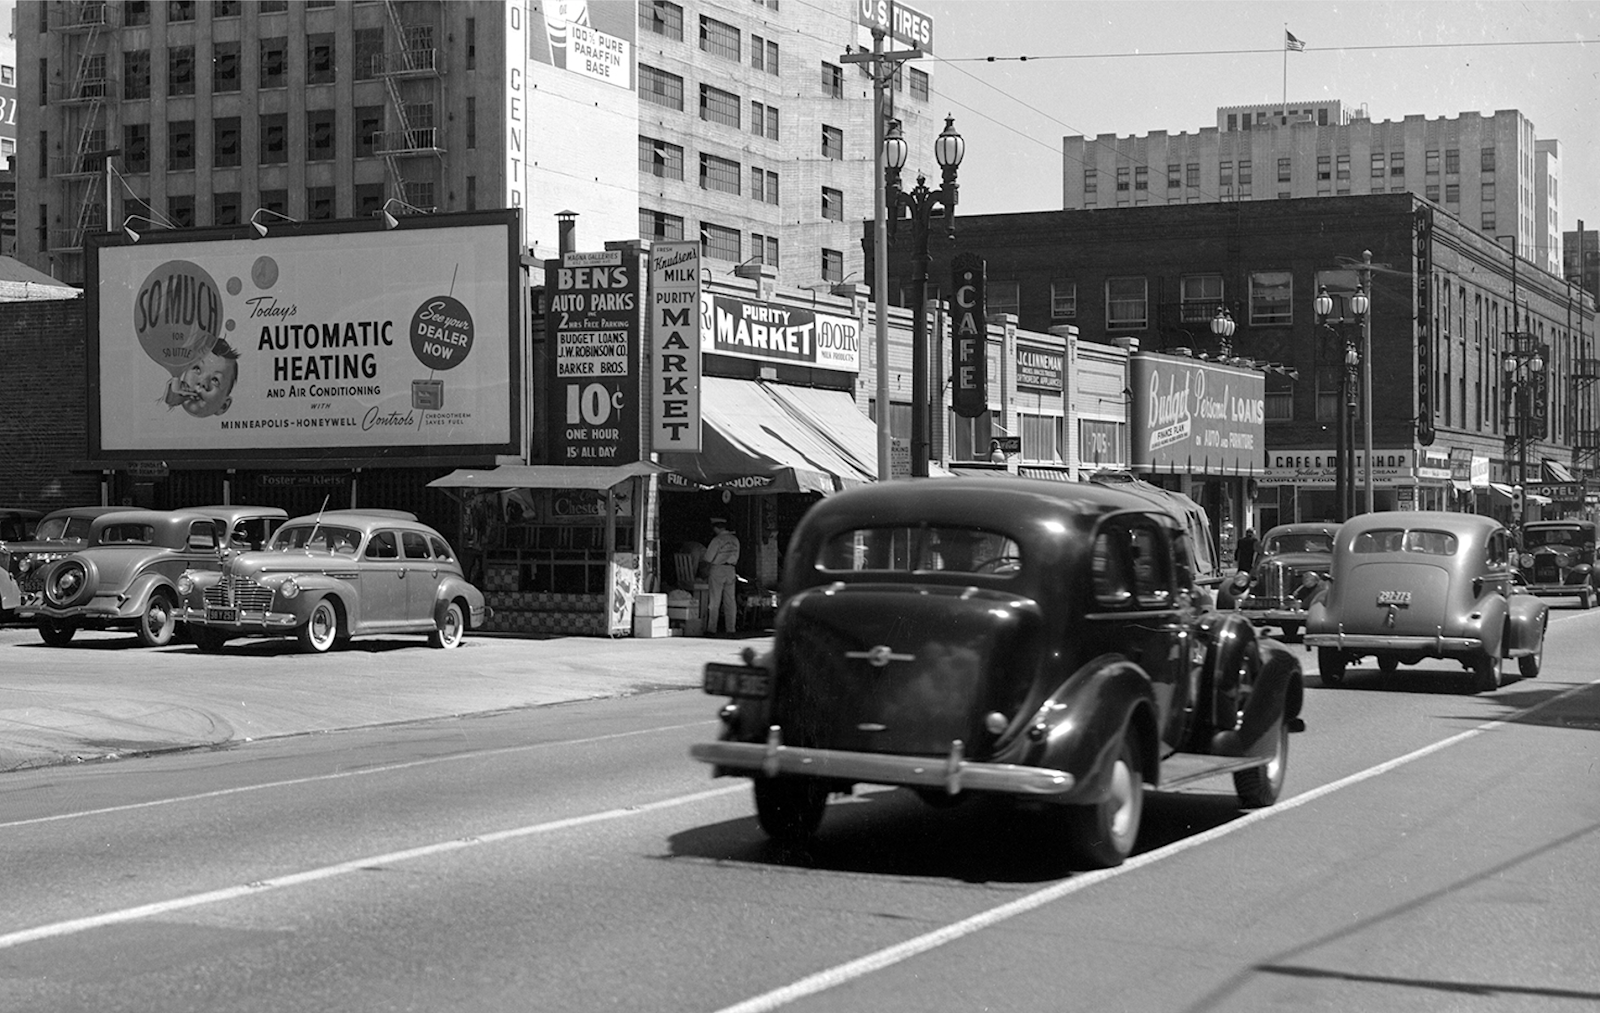 History Adventuring: Visiting downtown Los Angeles in the 1940s